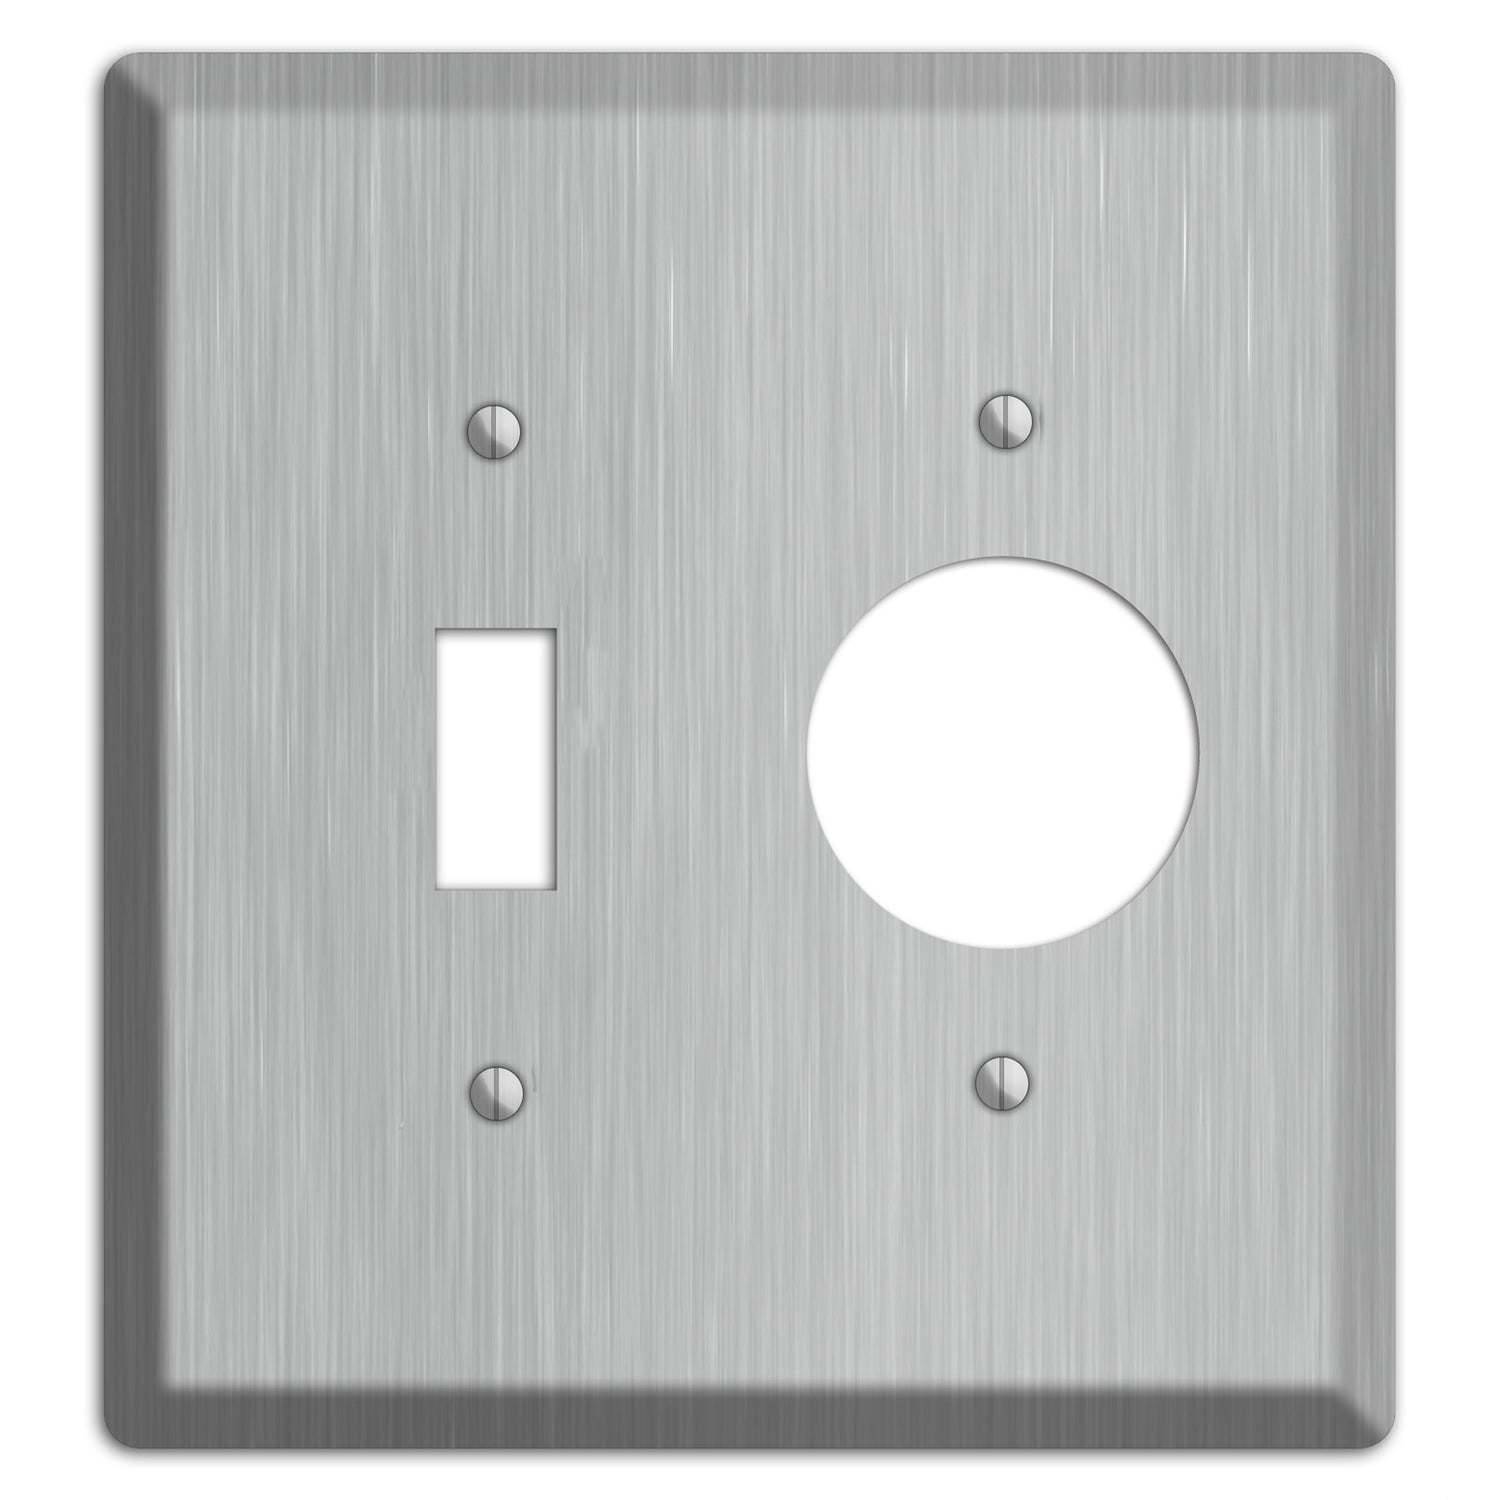 Brushed Stainless Steel Toggle / Receptacle Wallplate